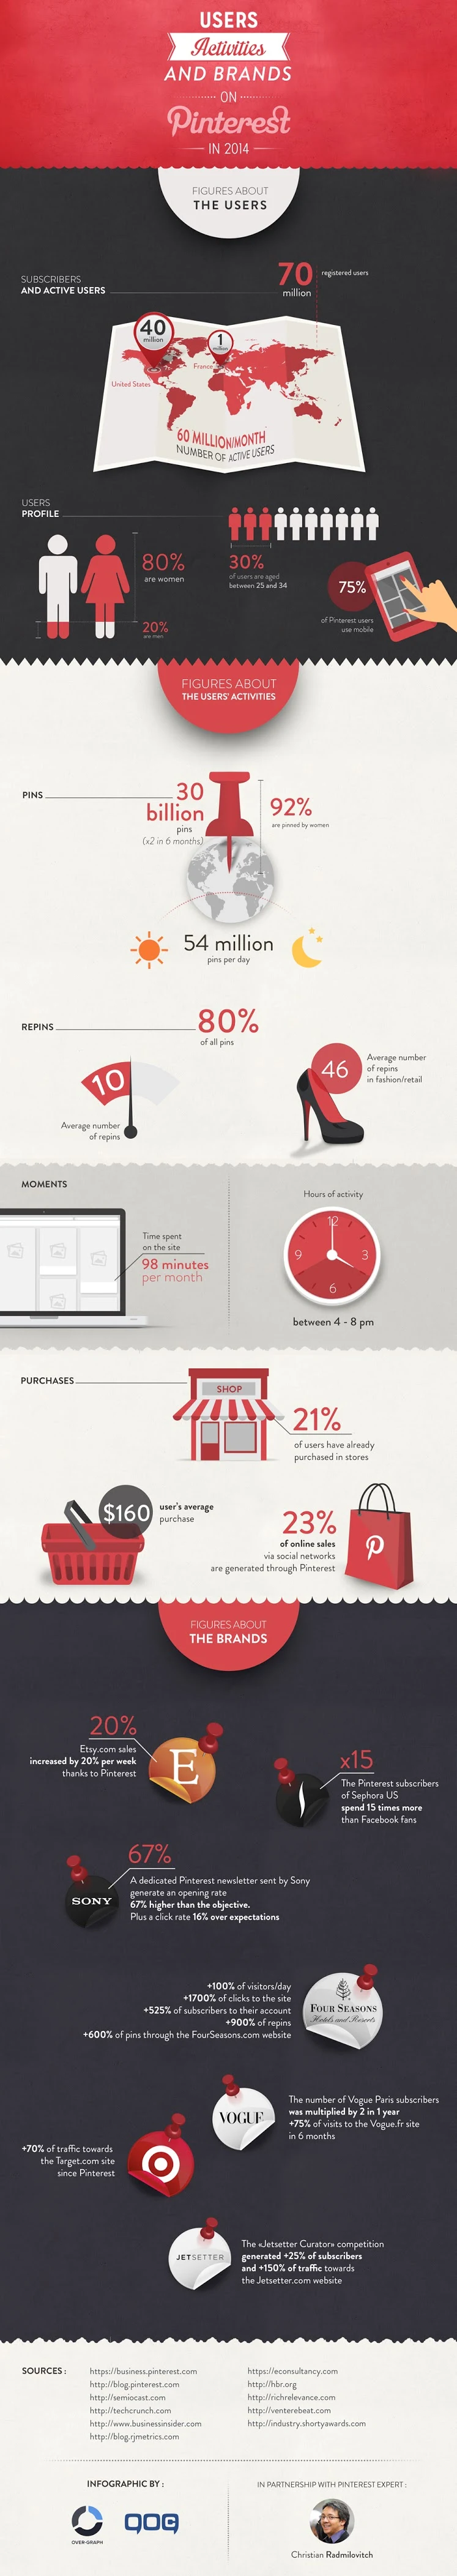 Users, Activities And Brands On #Pinterest In 2014 - #Infographic #SocialMedia